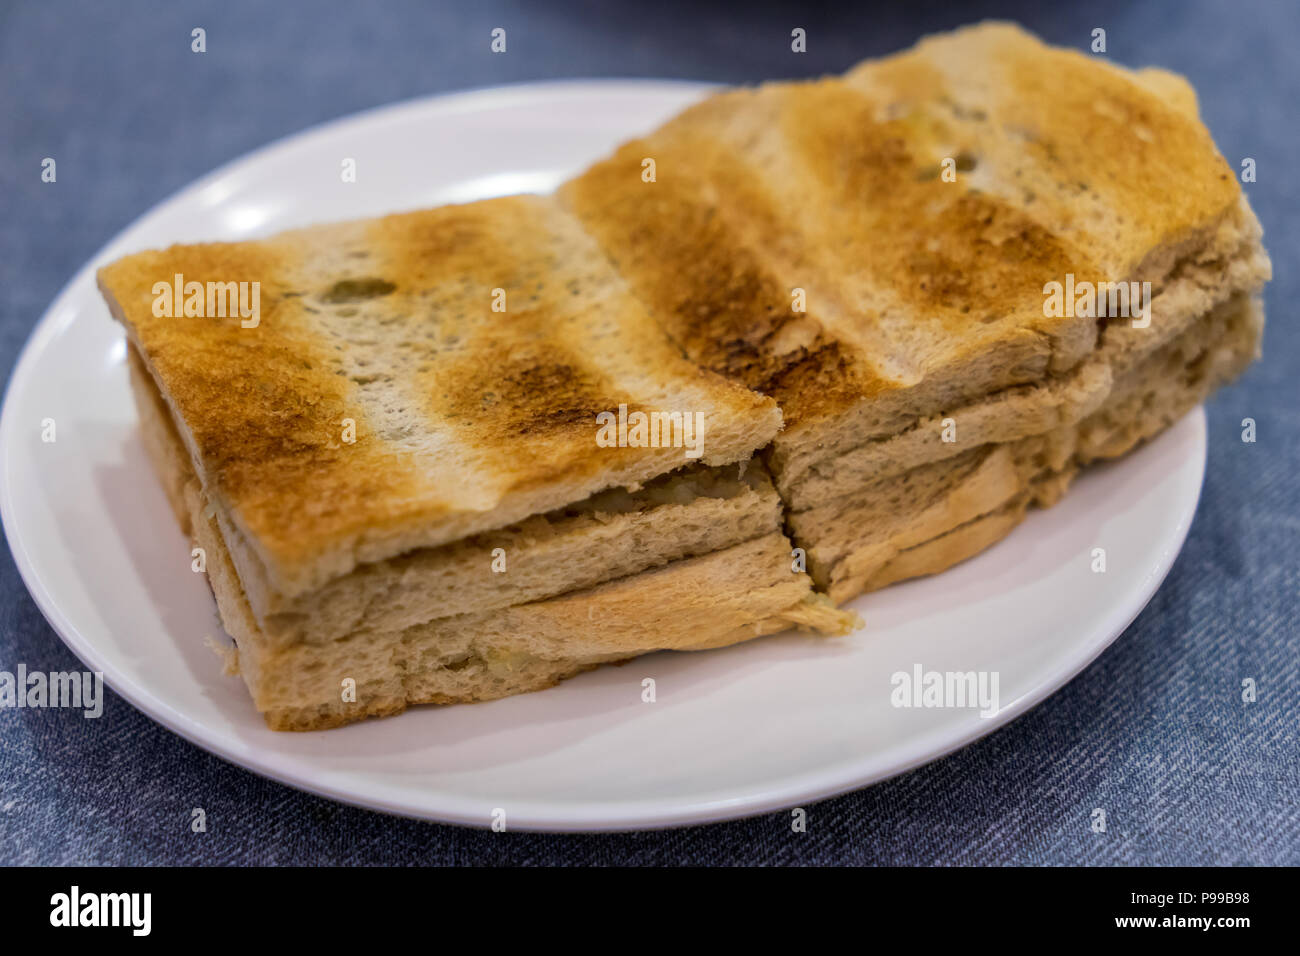 Traditional Singapore Breakfast called Kaya Toast, Bread with Coconut Jam and butter, Selective Focus technique Stock Photo